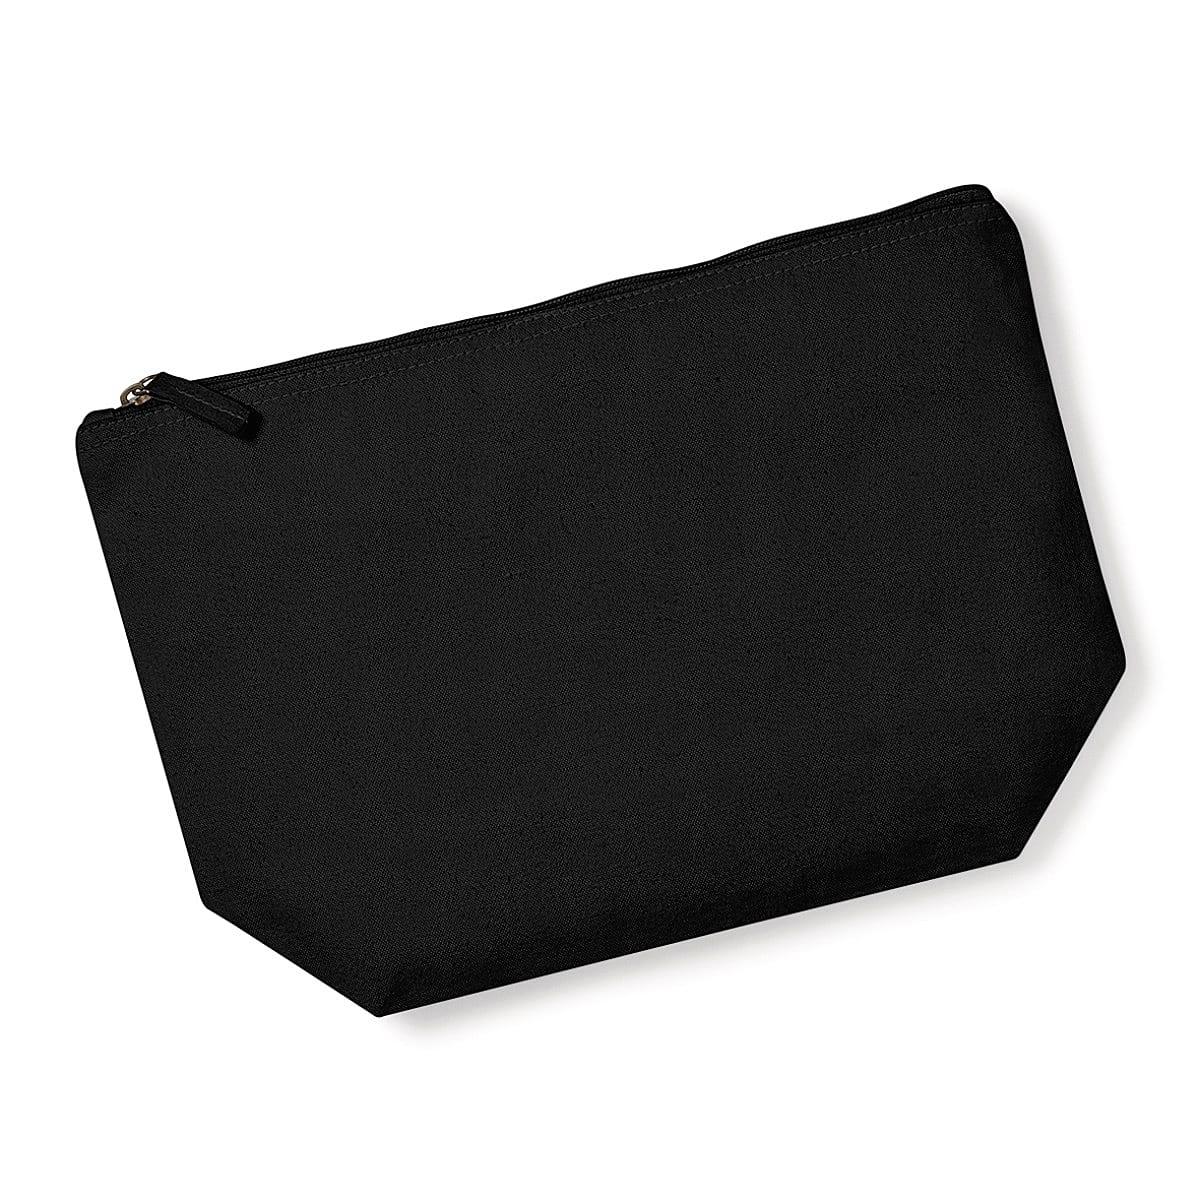 Westford Mill Organic Accessory Bag in Black (Product Code: W840)